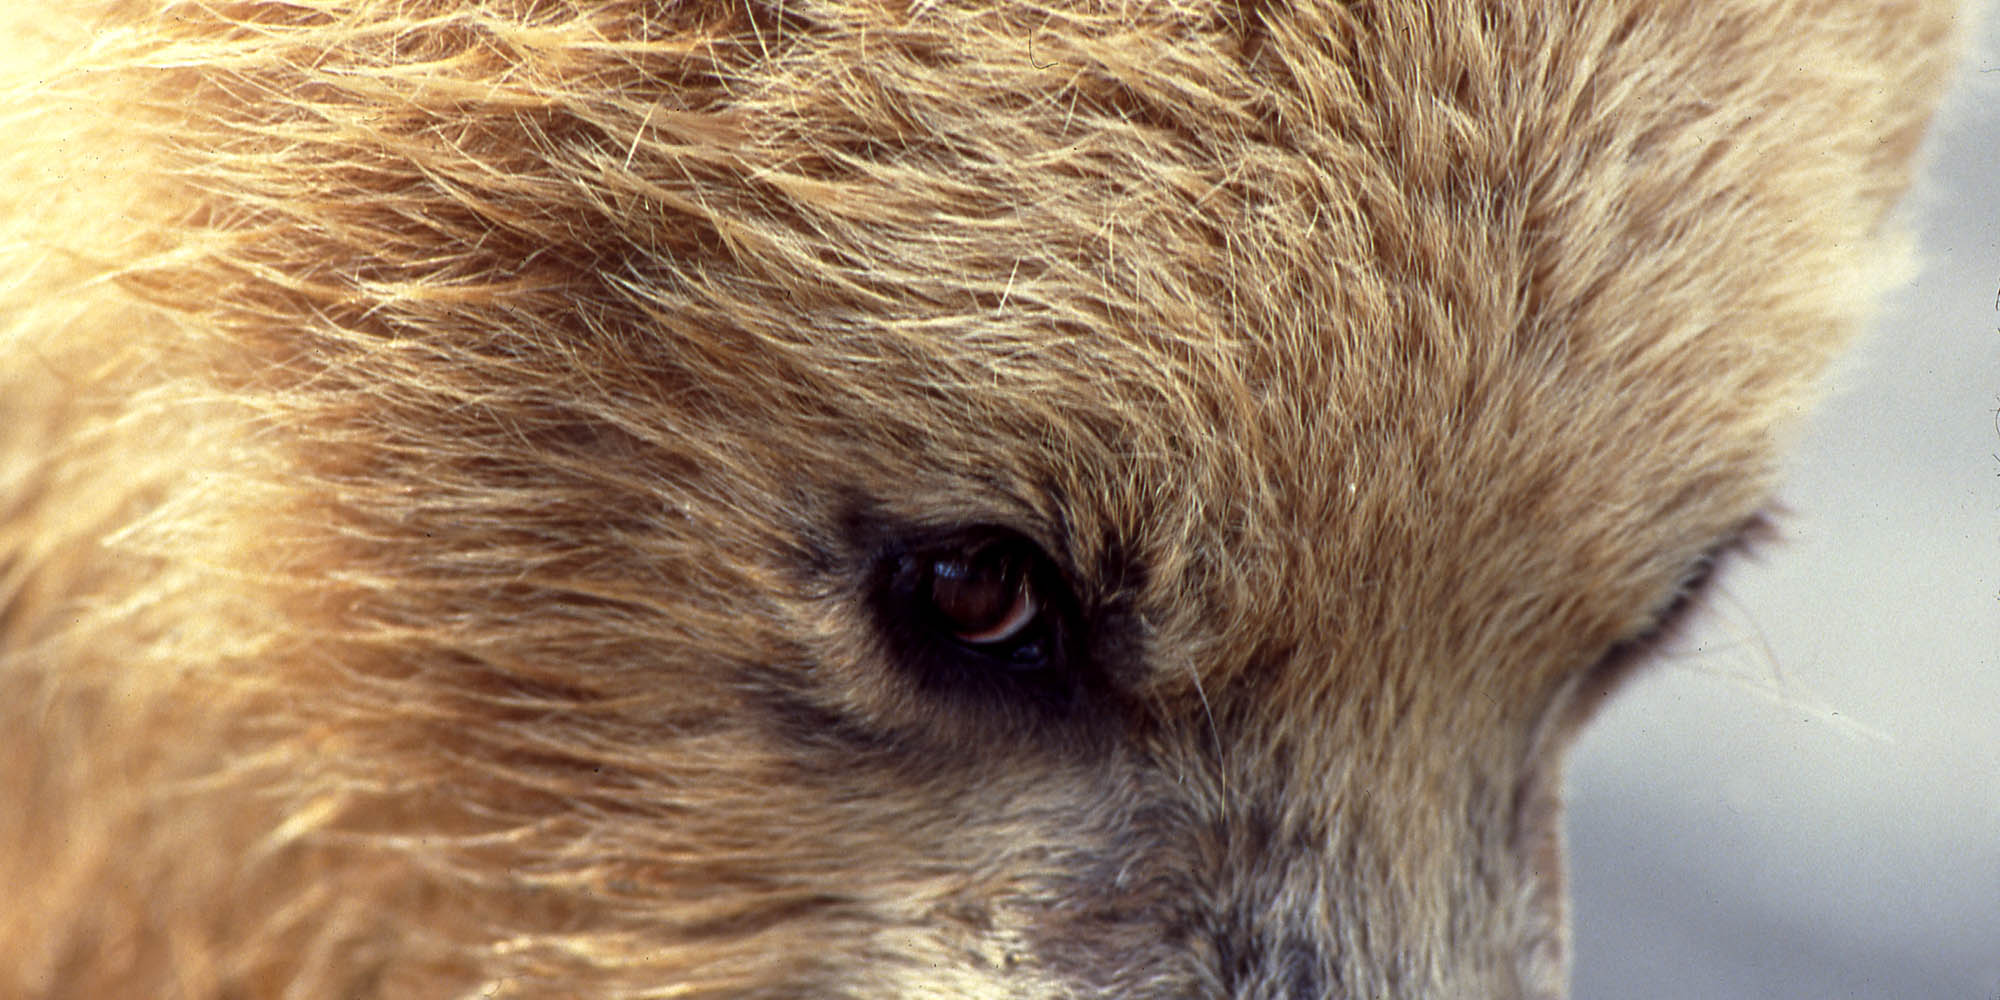 Close up photo of a Grizzly eye